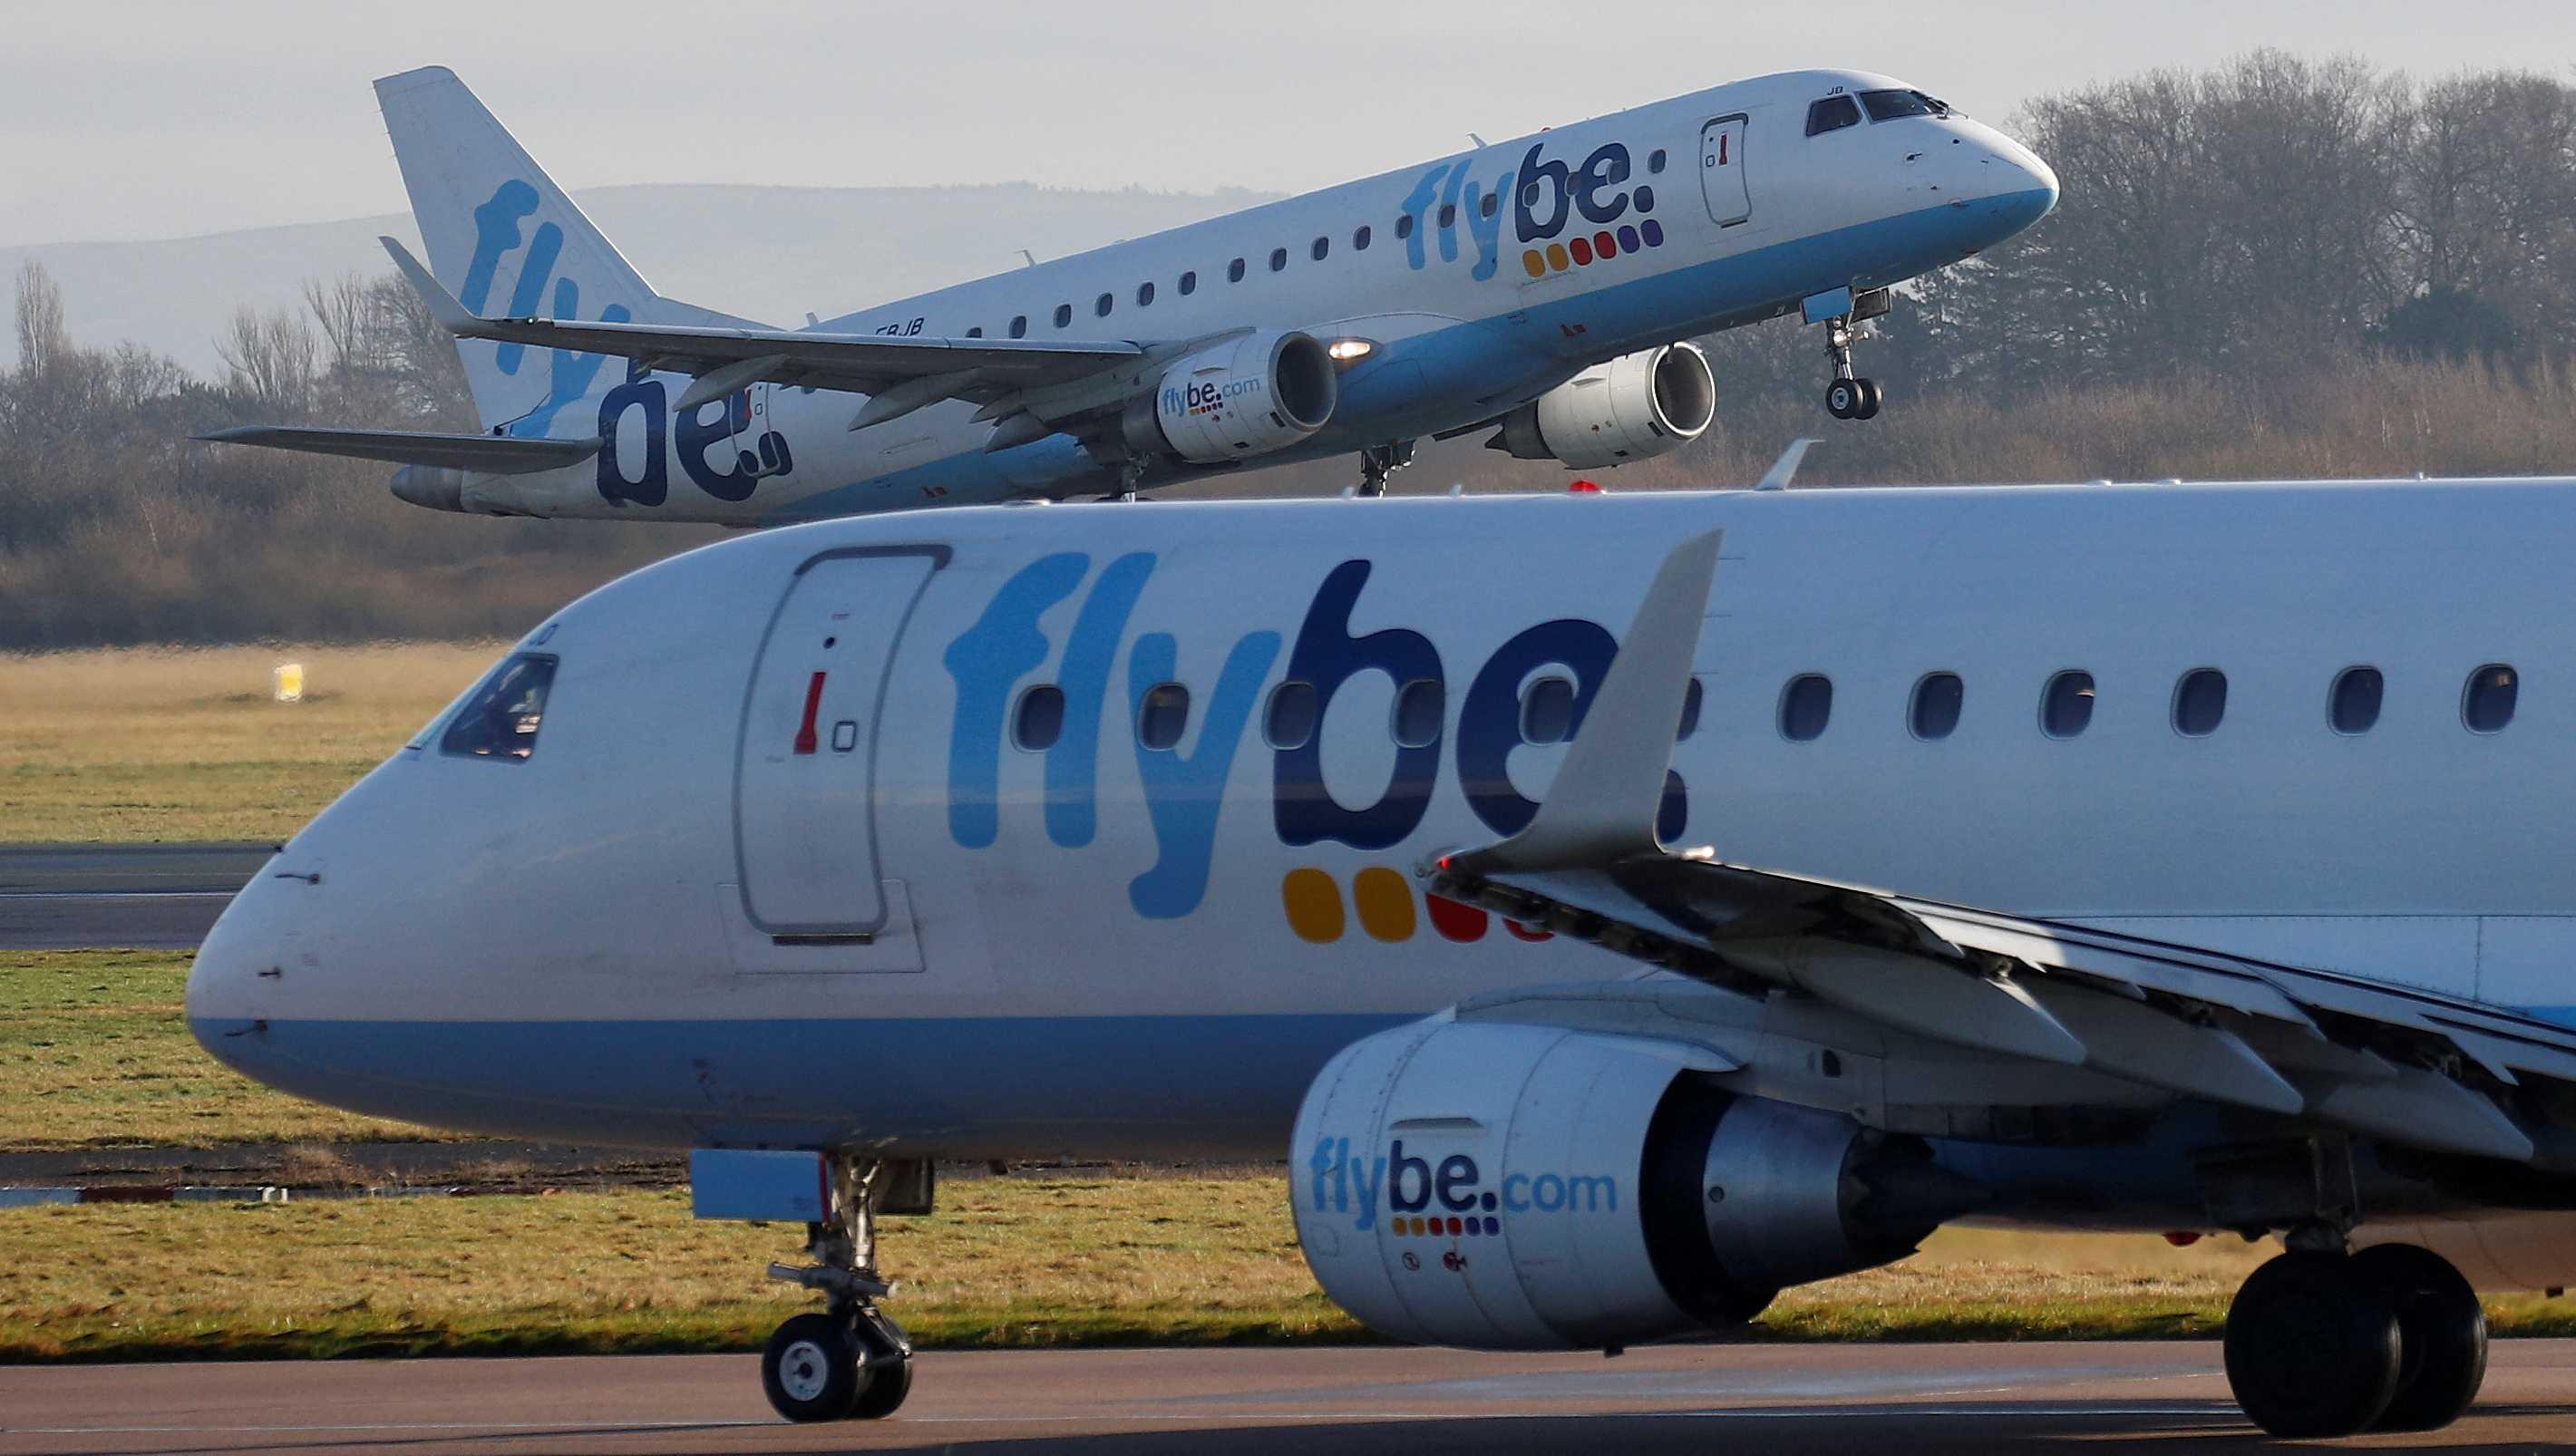 A Flybe plane takes off from Manchester Airport in Manchester, Britain Jan 20, 2020. Photo: Reuters